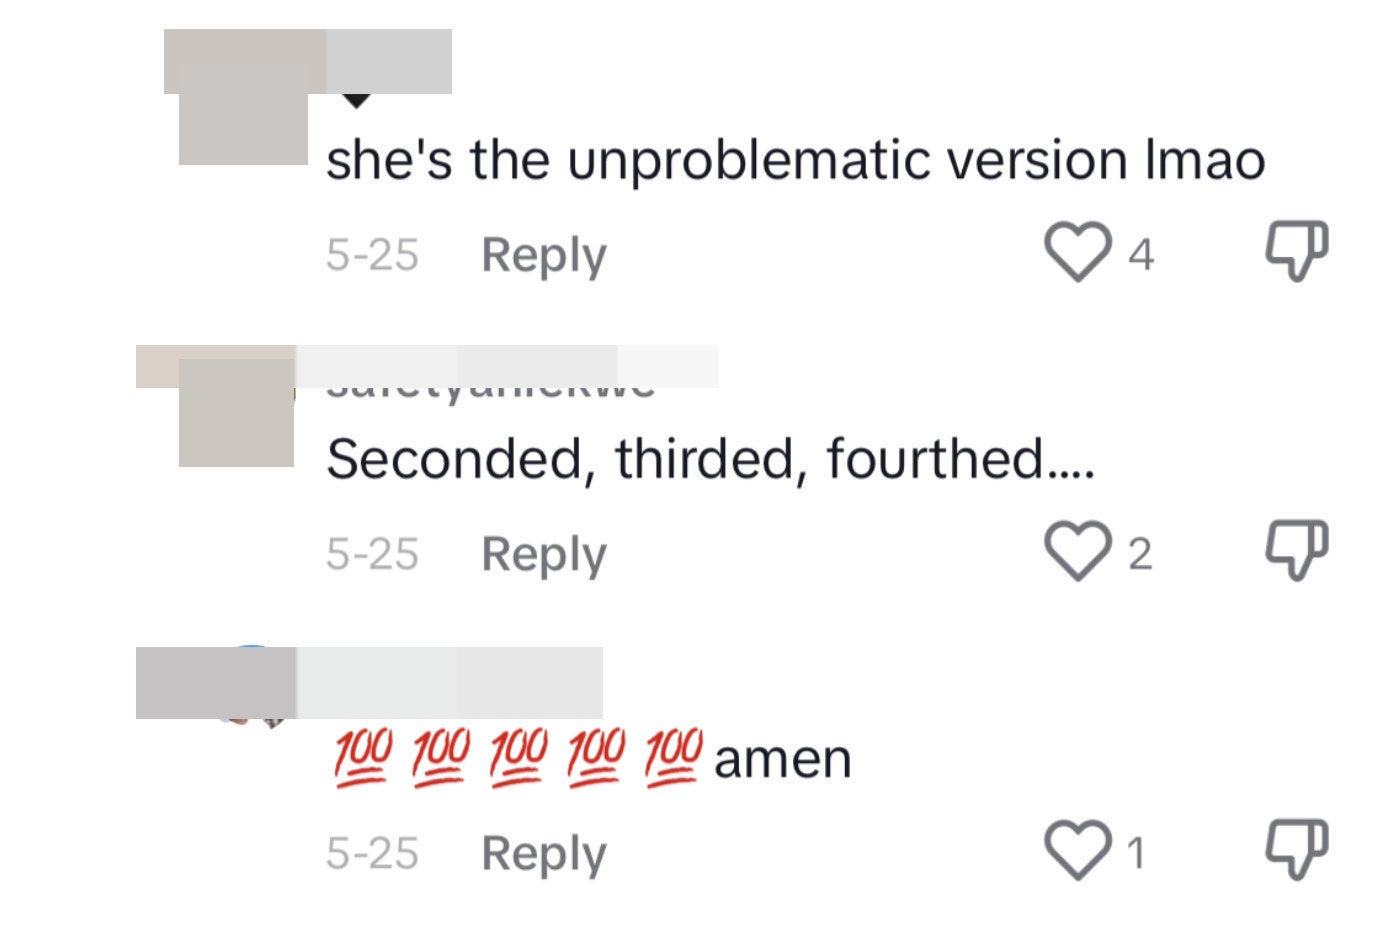 Screenshot of TikTok comments agreeing